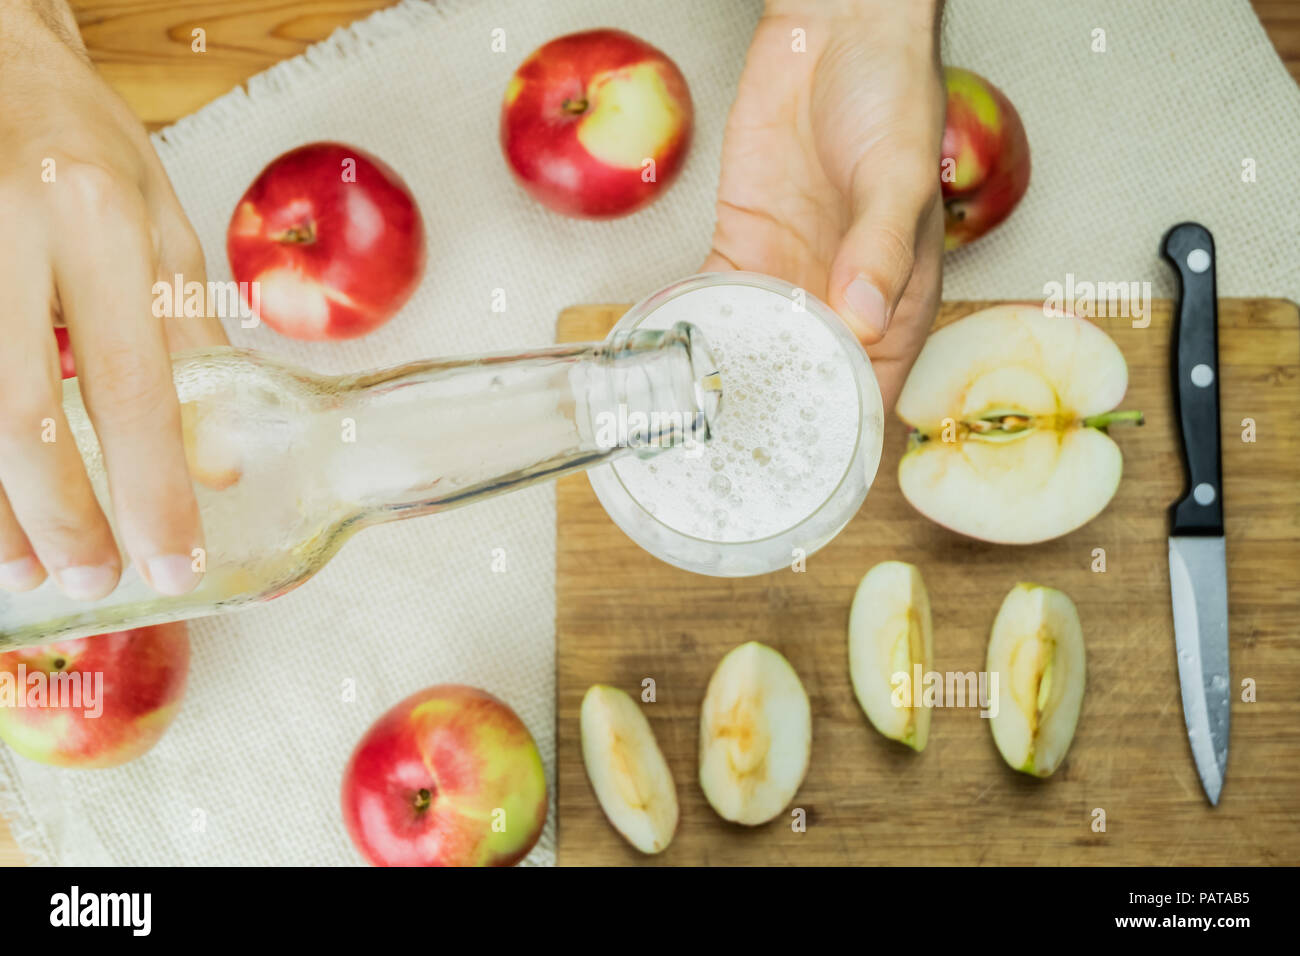 Pouring sparkling apple cidre drink into glass, top view. Flat lay image with hands fixing a drink of cider on rustic wooden table background with rip Stock Photo